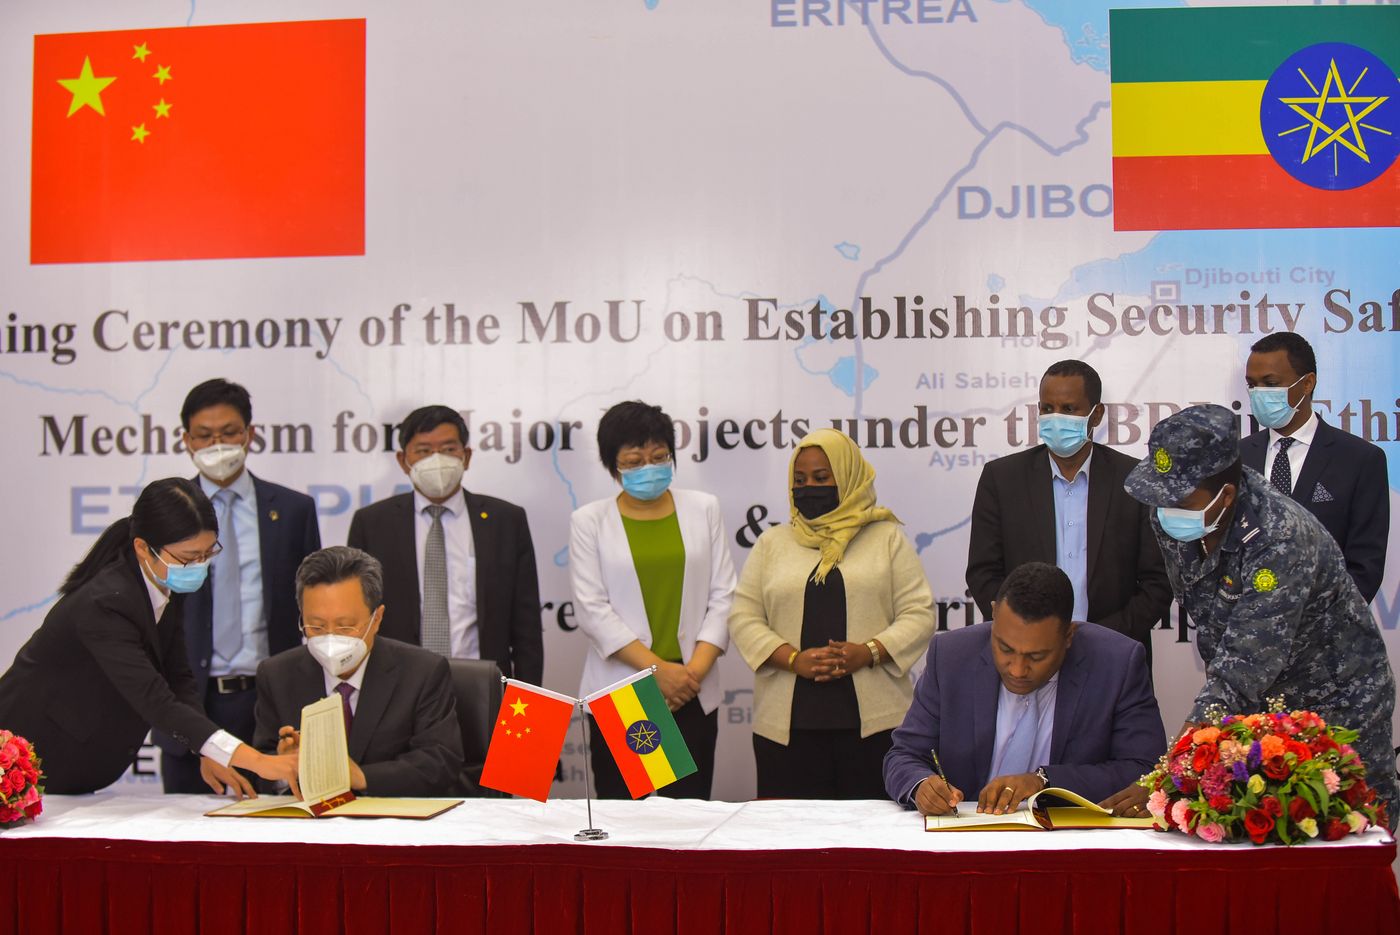 On March 6, 2021, China and Ethiopia signed a Memorandum of Understanding (MoU) establishing security safeguarding measures for BRI projects (BRI) in Ethiopia. 